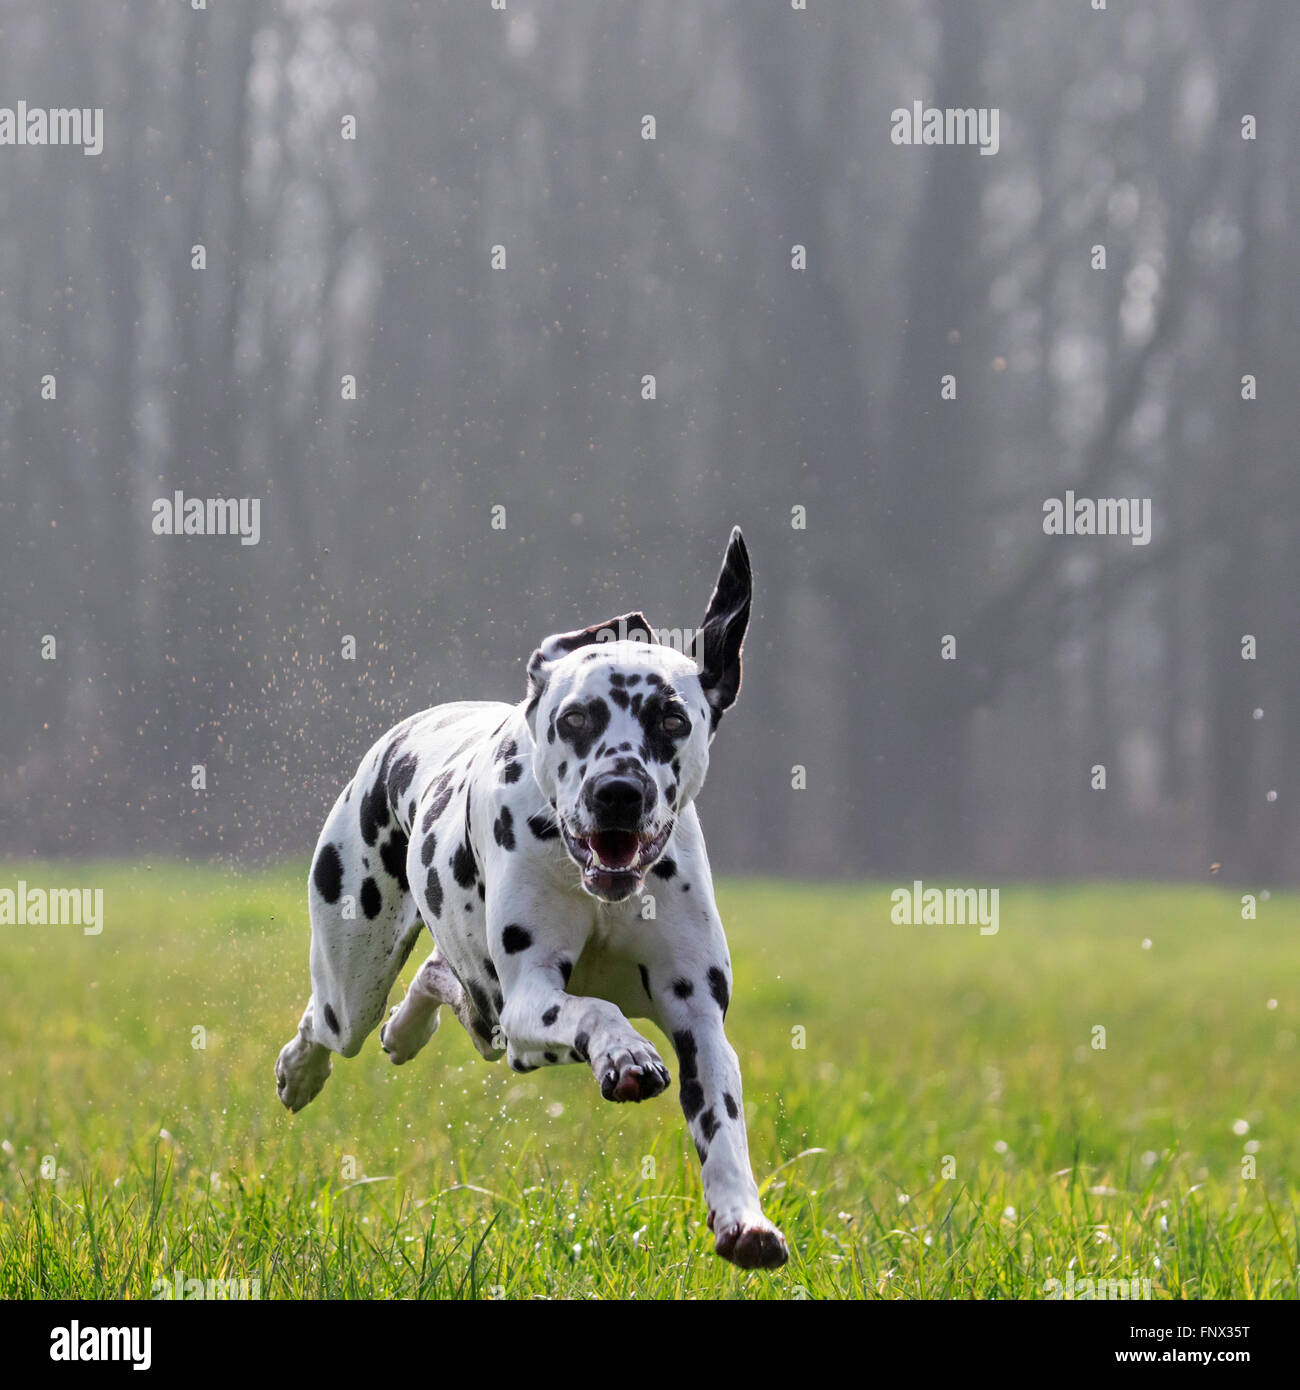 Dalmatian / carriage dog / spotted coach dog running through wet grass in field Stock Photo